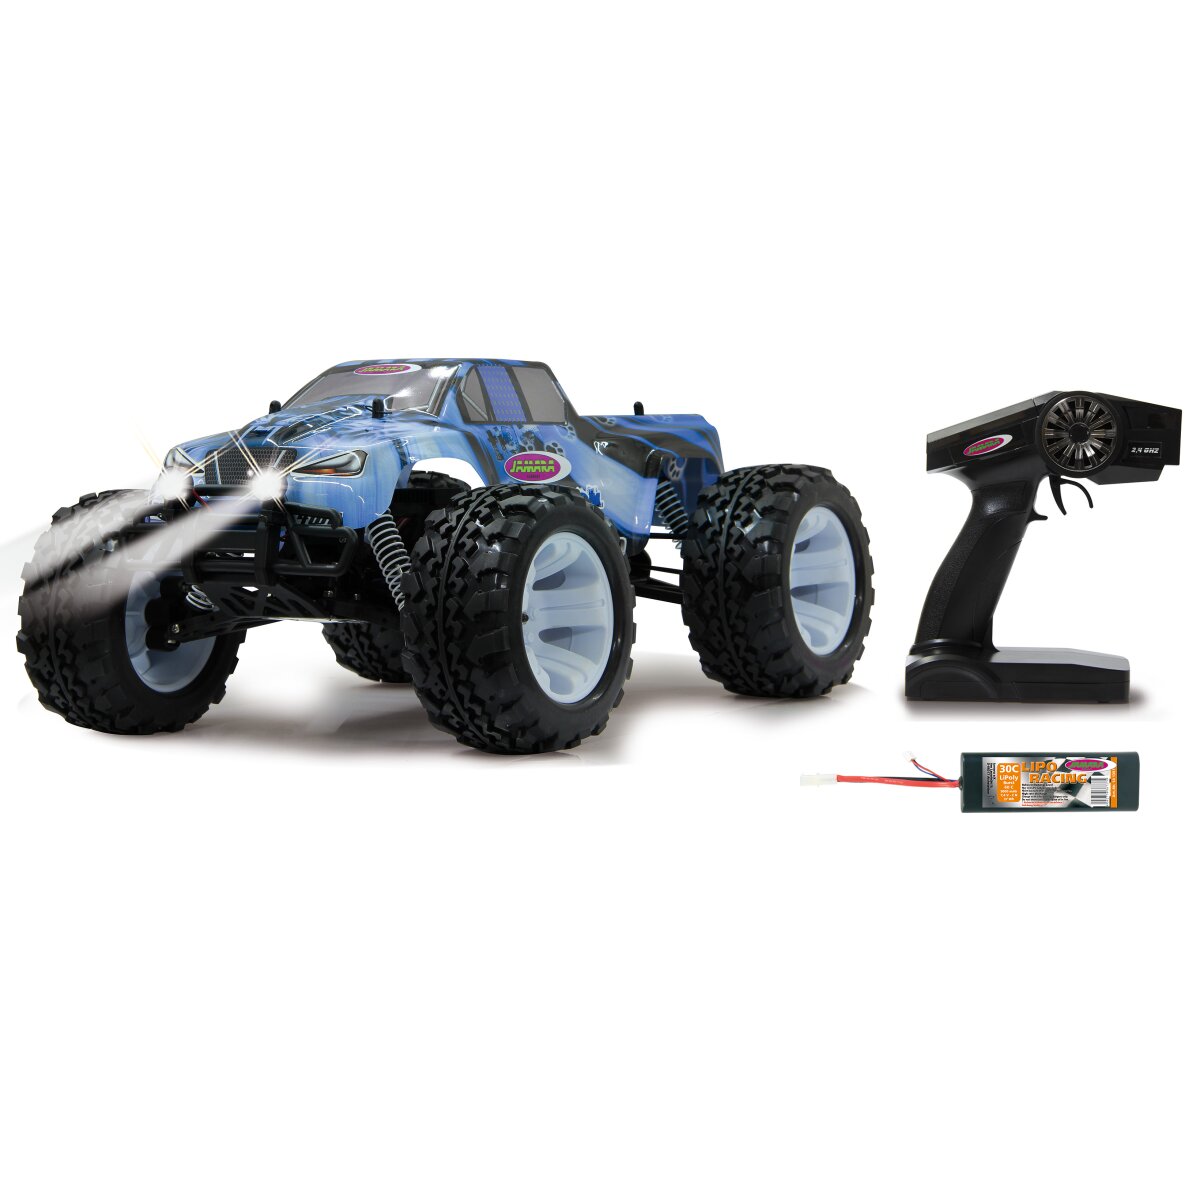 Tiger Ice Monstertruck 4WD 1:10 Lipo 2,4GHz mit LED